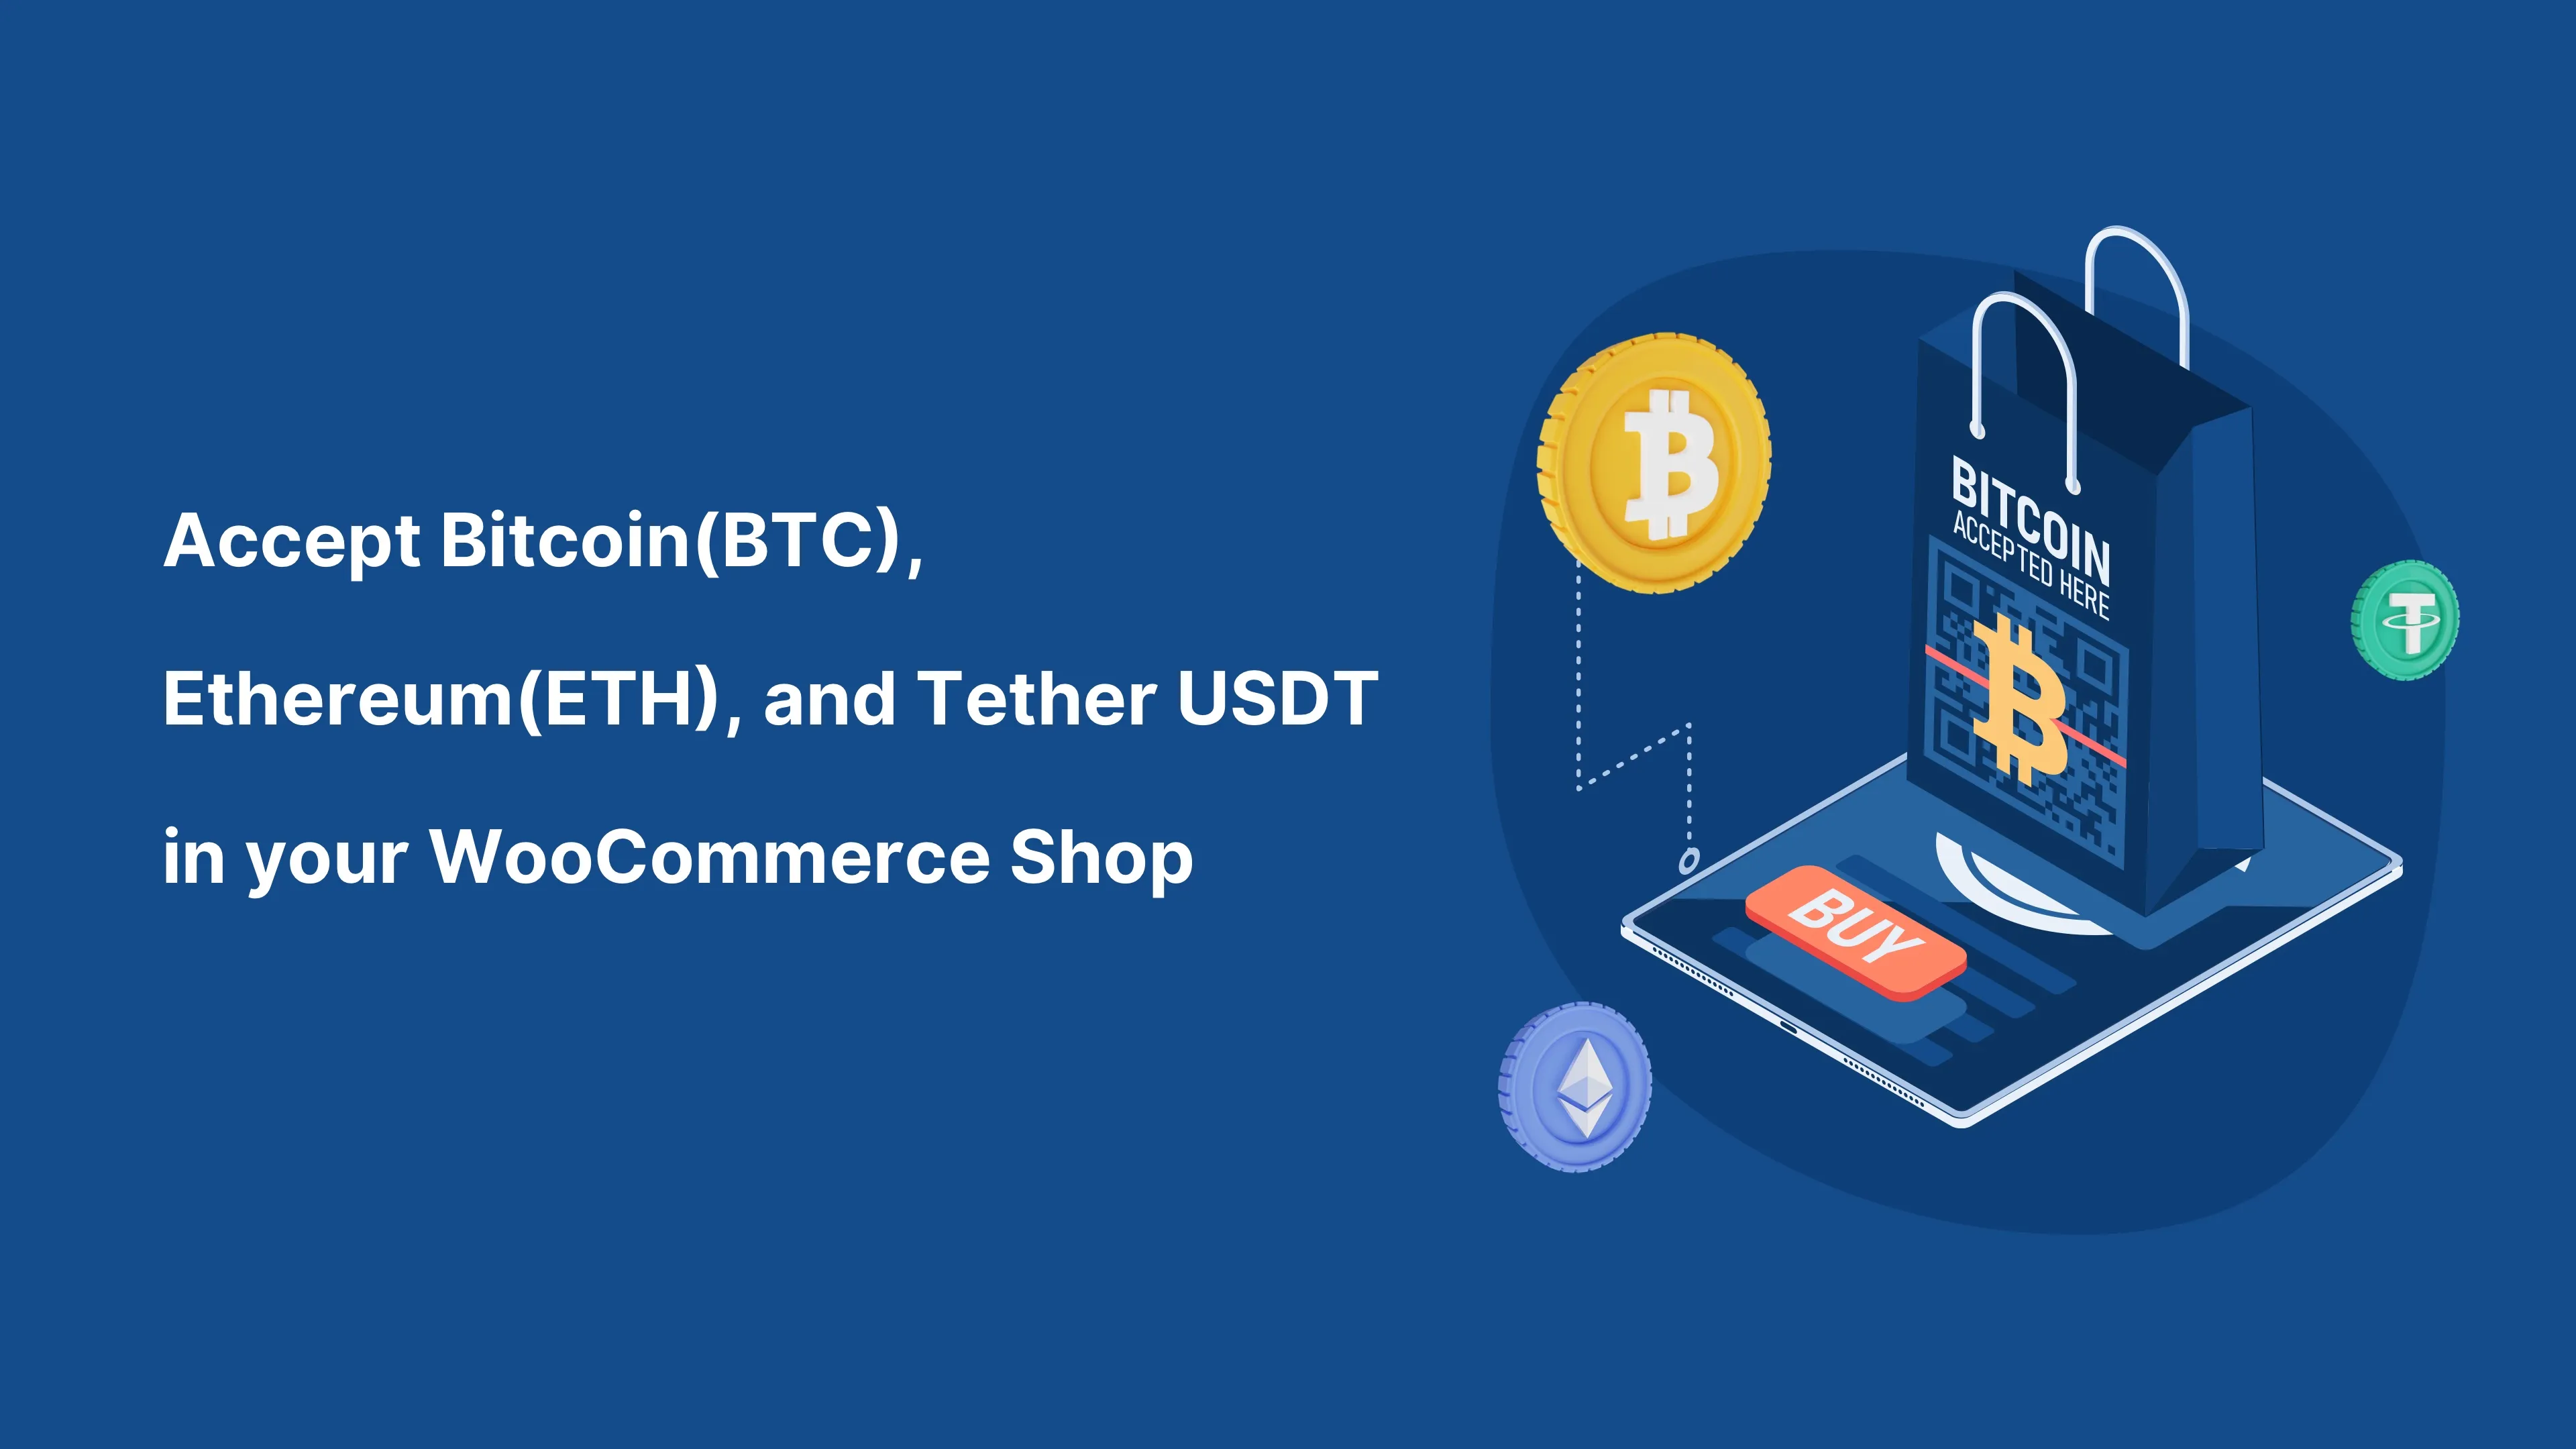 Accept Bitcoin(BTC) and Any Cryptocurrency in Your WooCommerce Shop